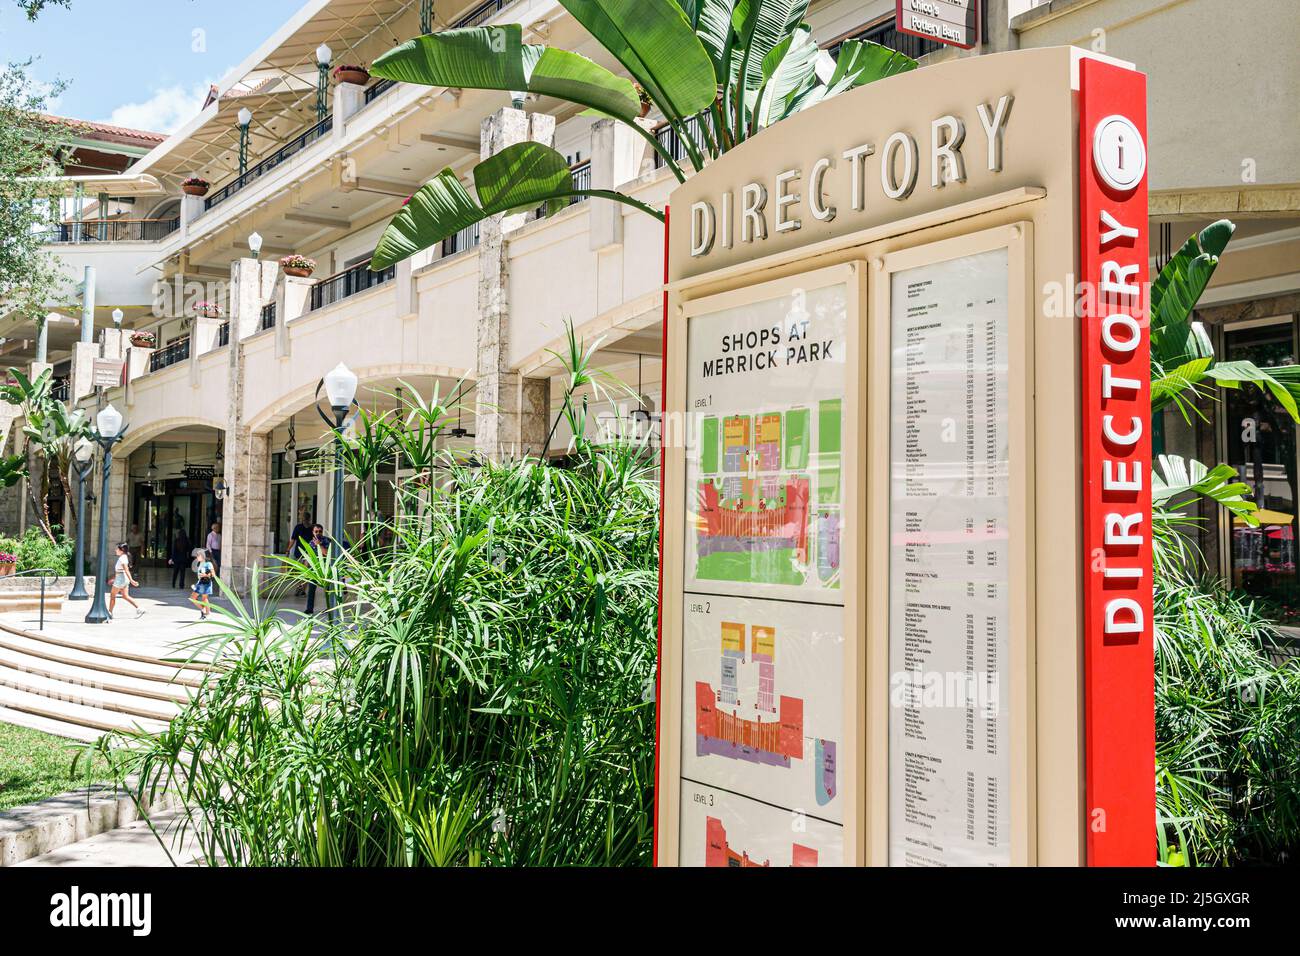 Miami Florida Coral Gables Shops at Merrick Park upscale outdoor shopping mall store business directory map Stock Photo